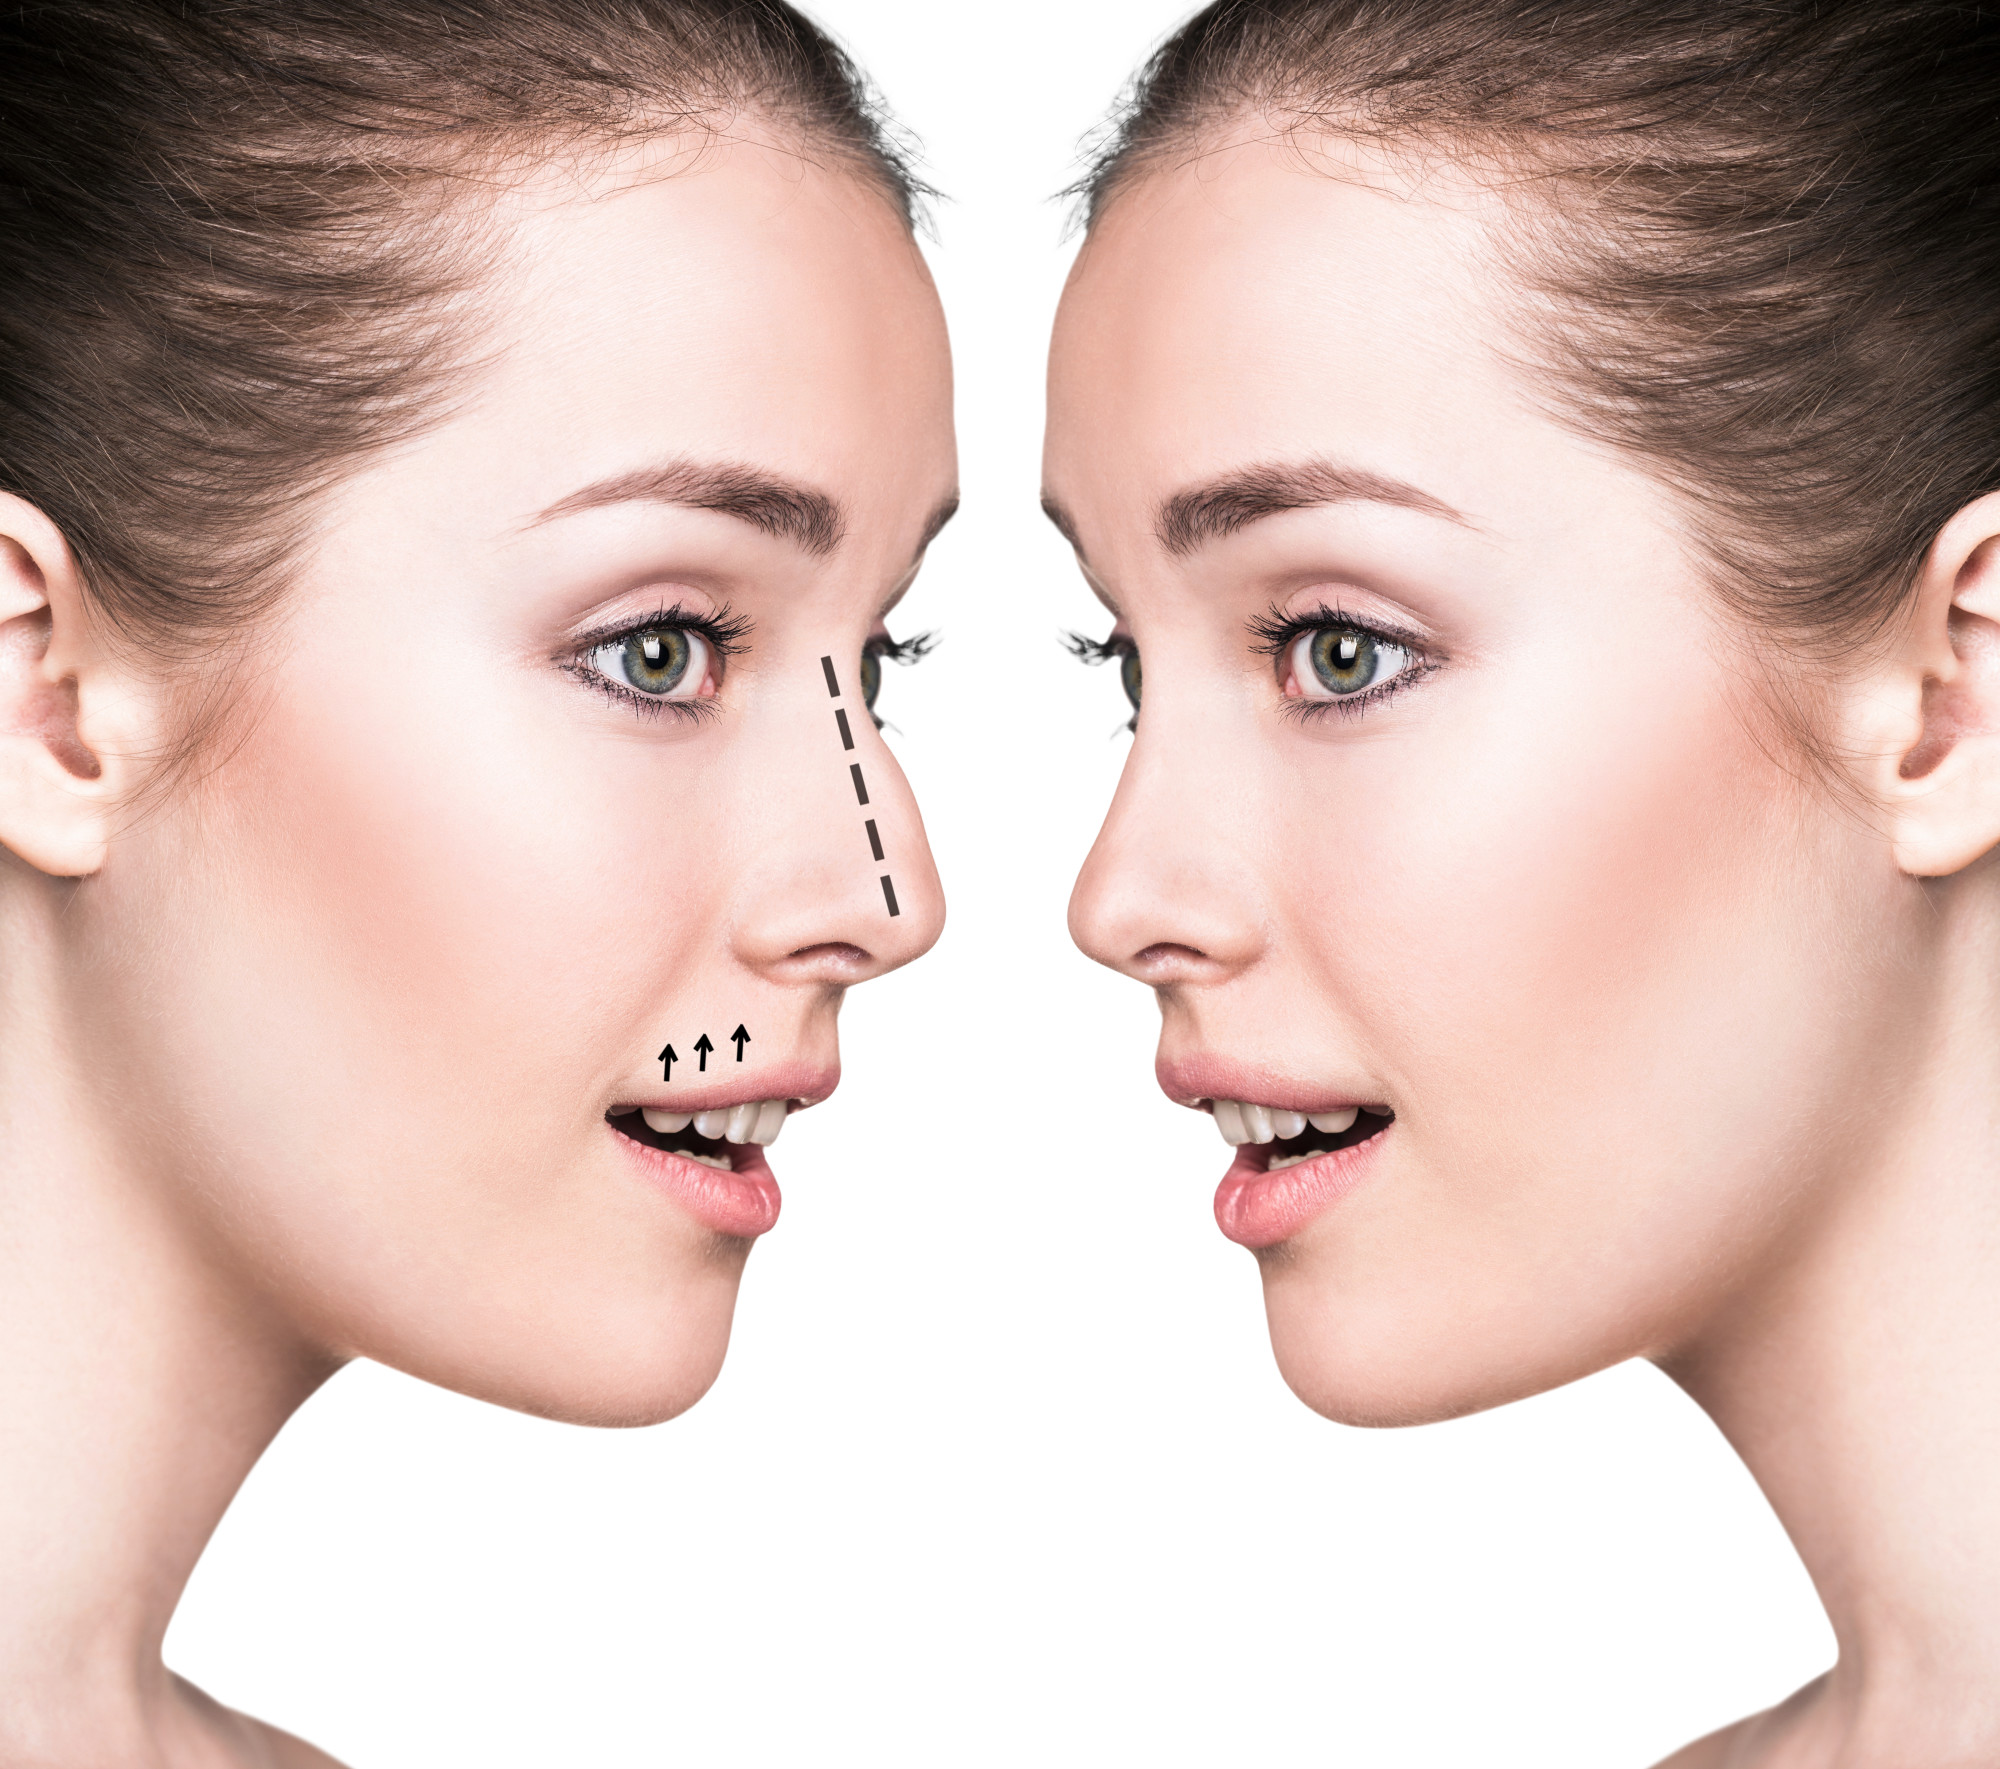 3 Things to Know About Removing a Nose Hump With Rhinoplasty